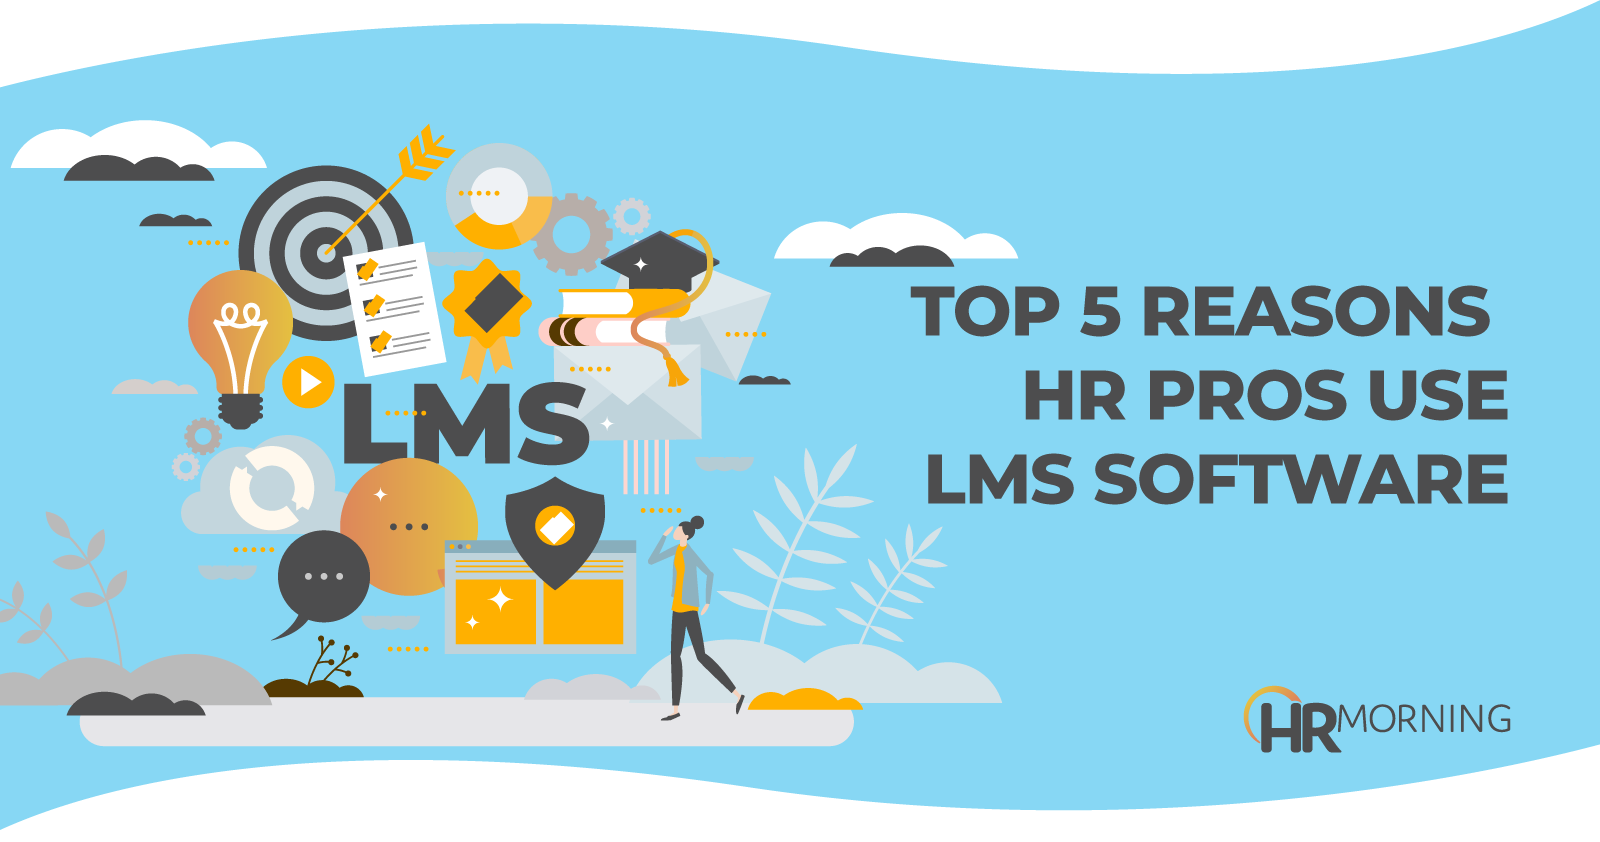 Top 5 Reasons HR Pros Use LMS Software